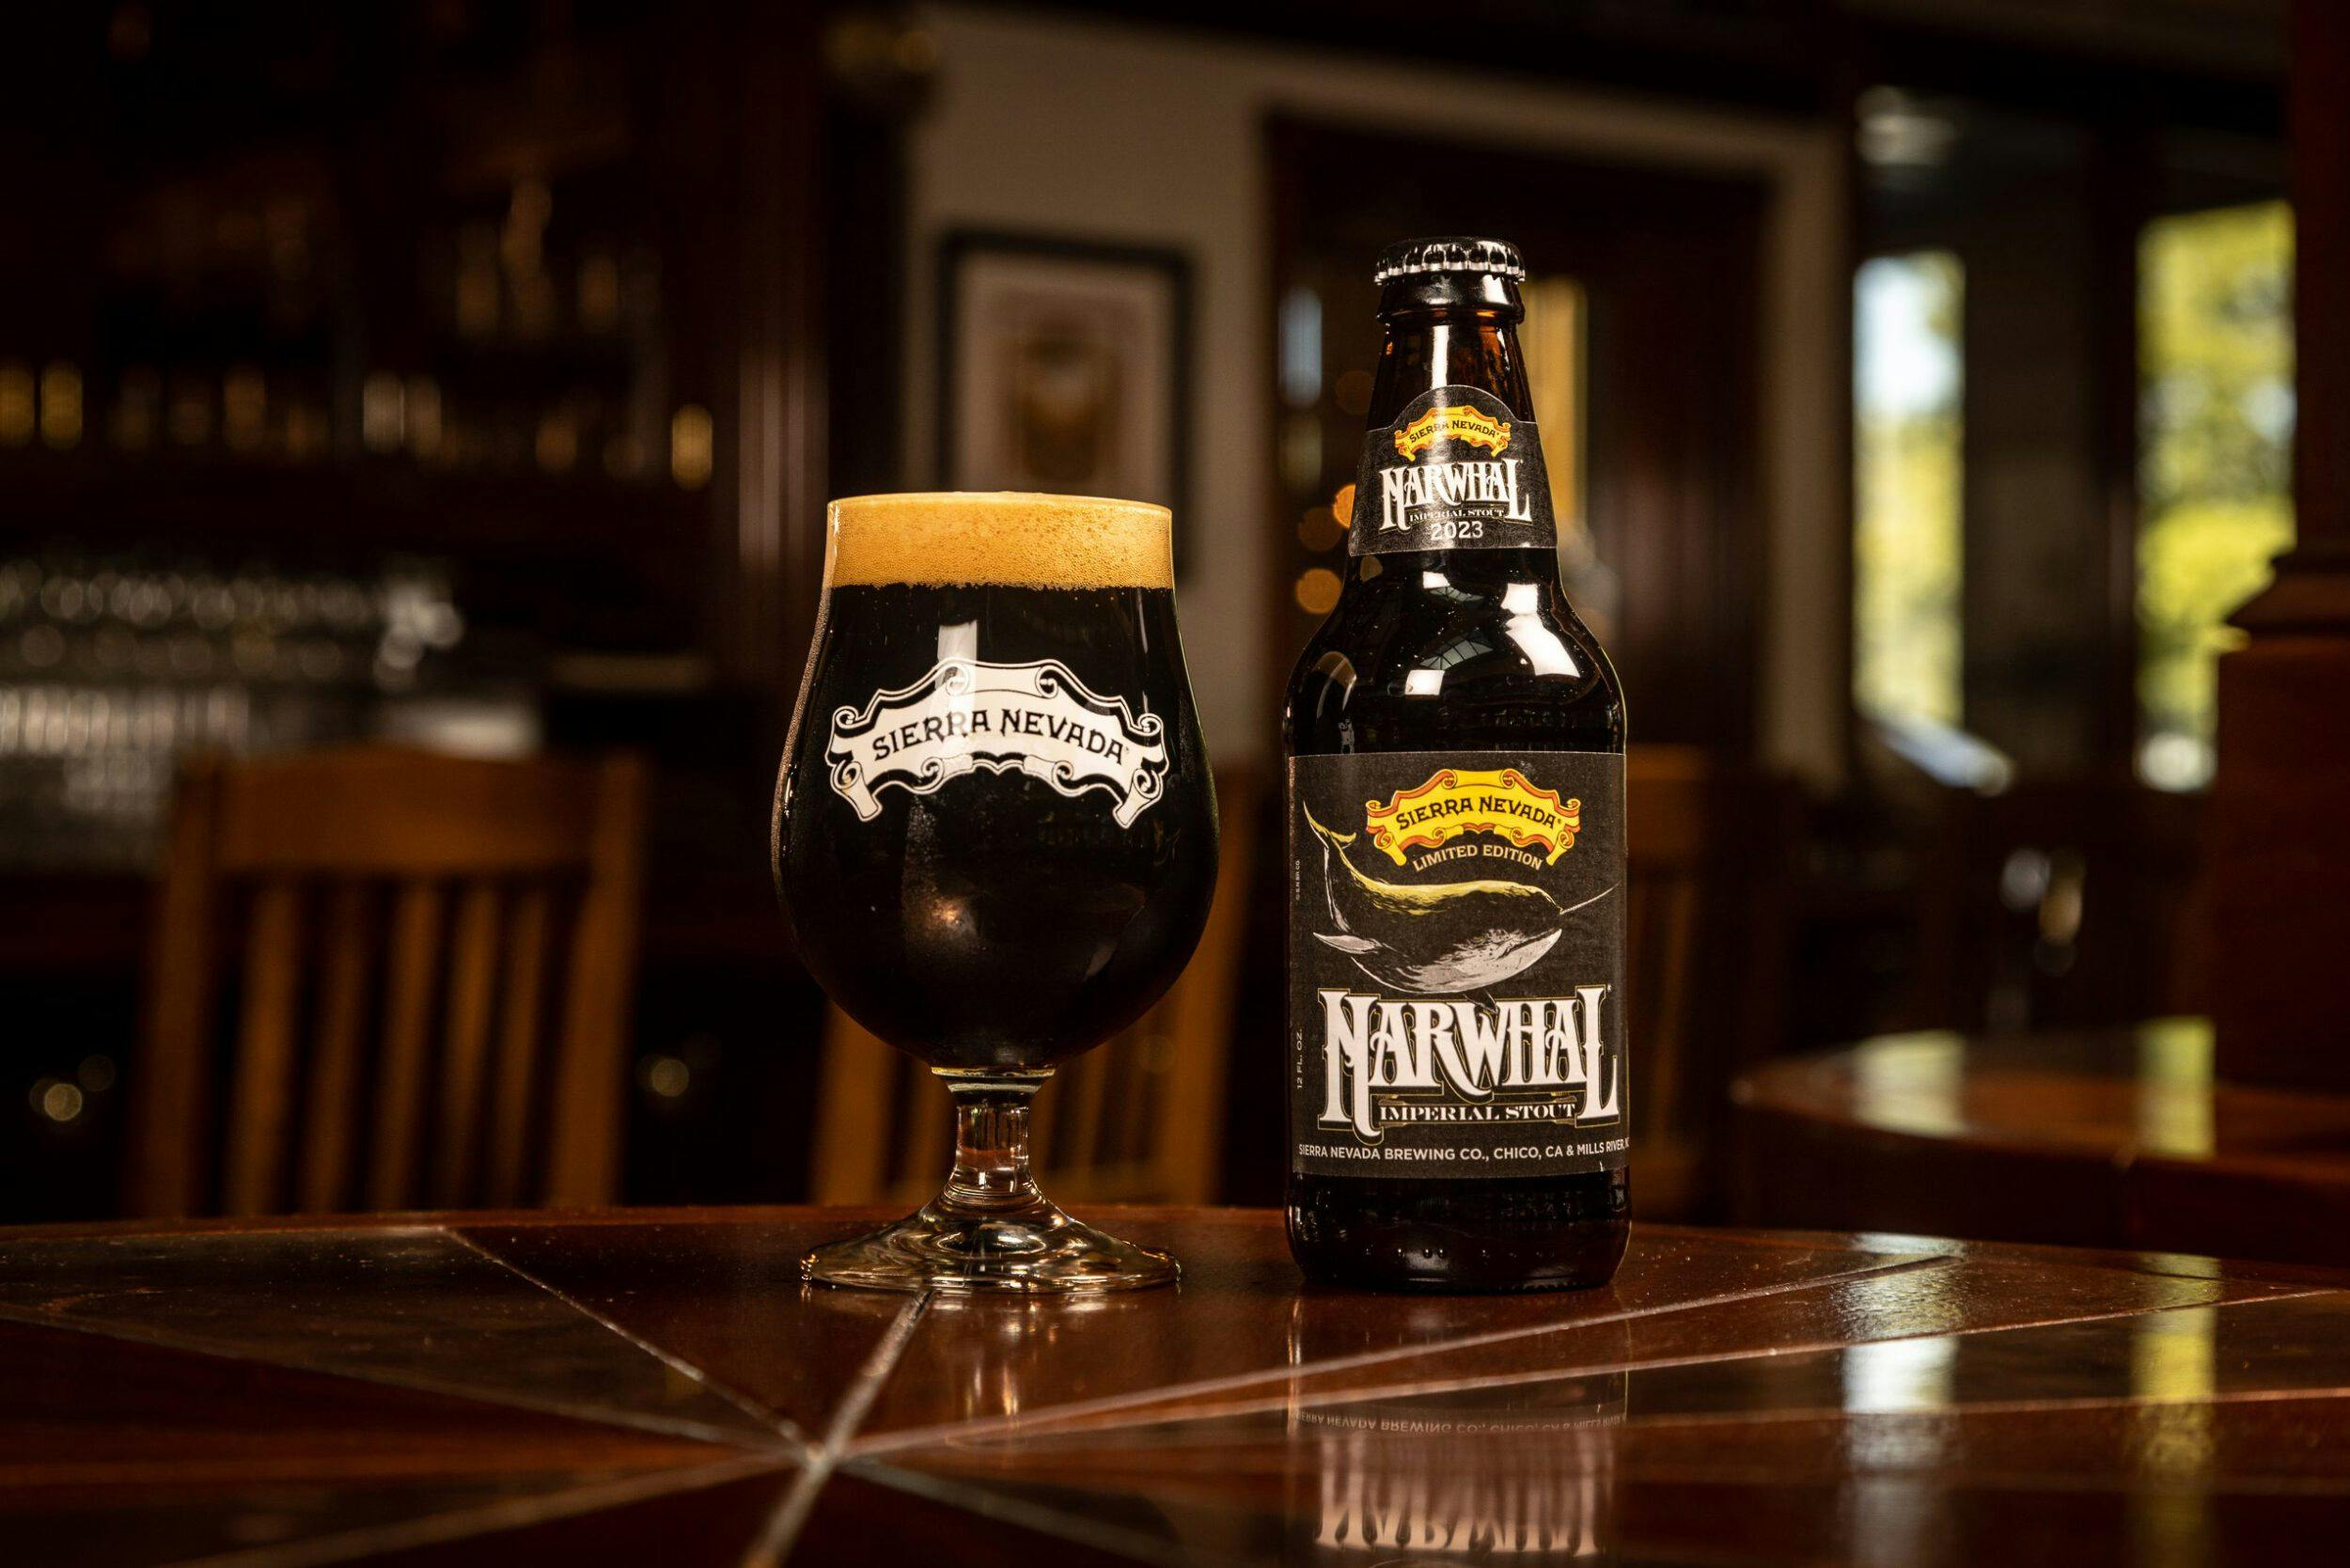 Narwhal Imperial Stout beer bottle and glass